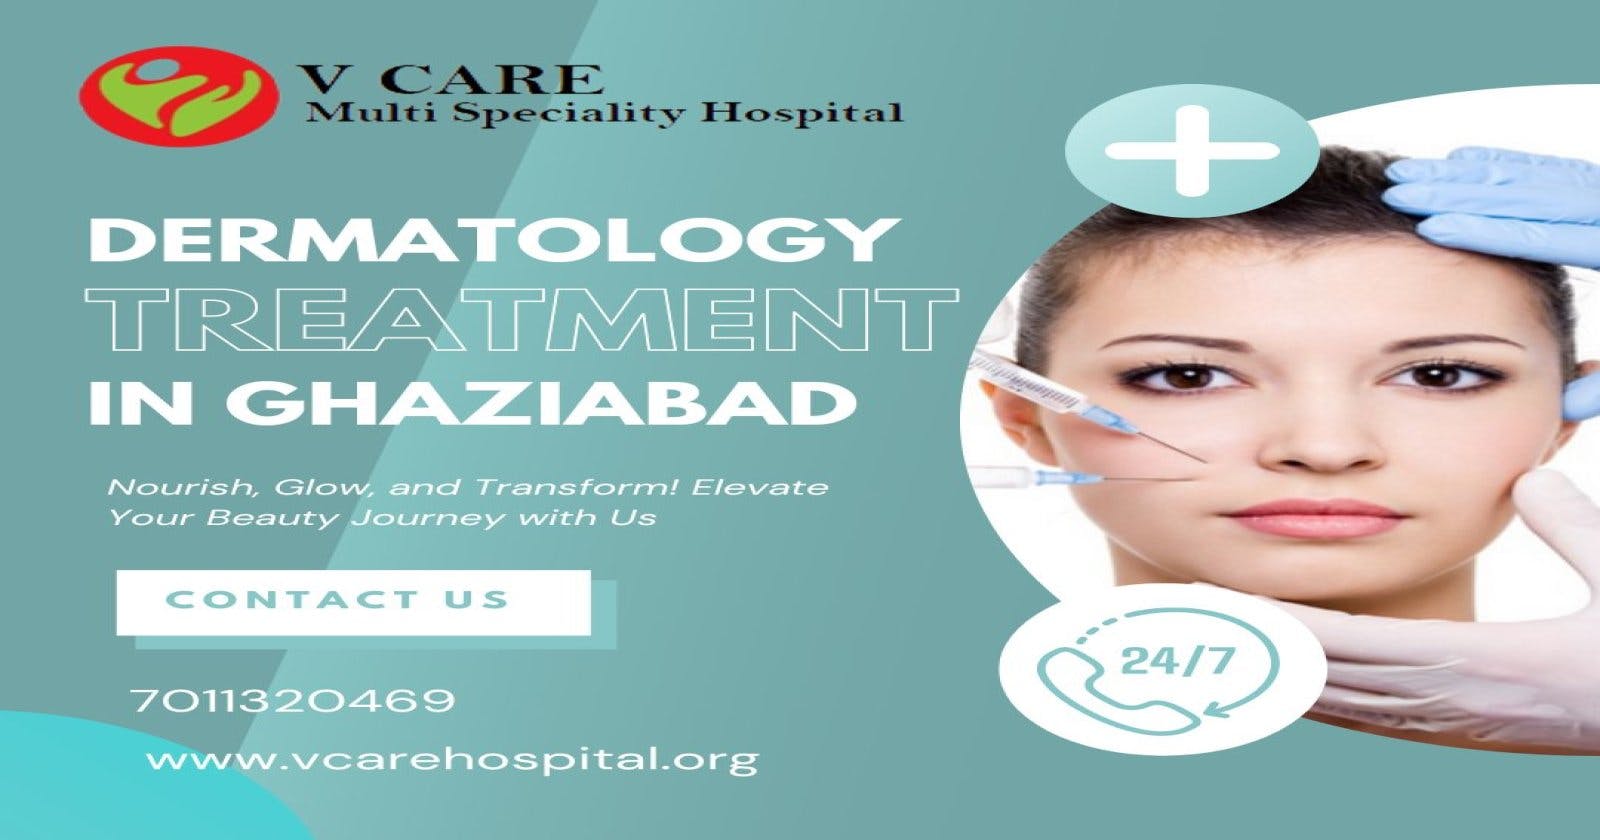 Experience Dermatology treatment & Fracture management Hospital in Ghaziabad with V Care Hospital